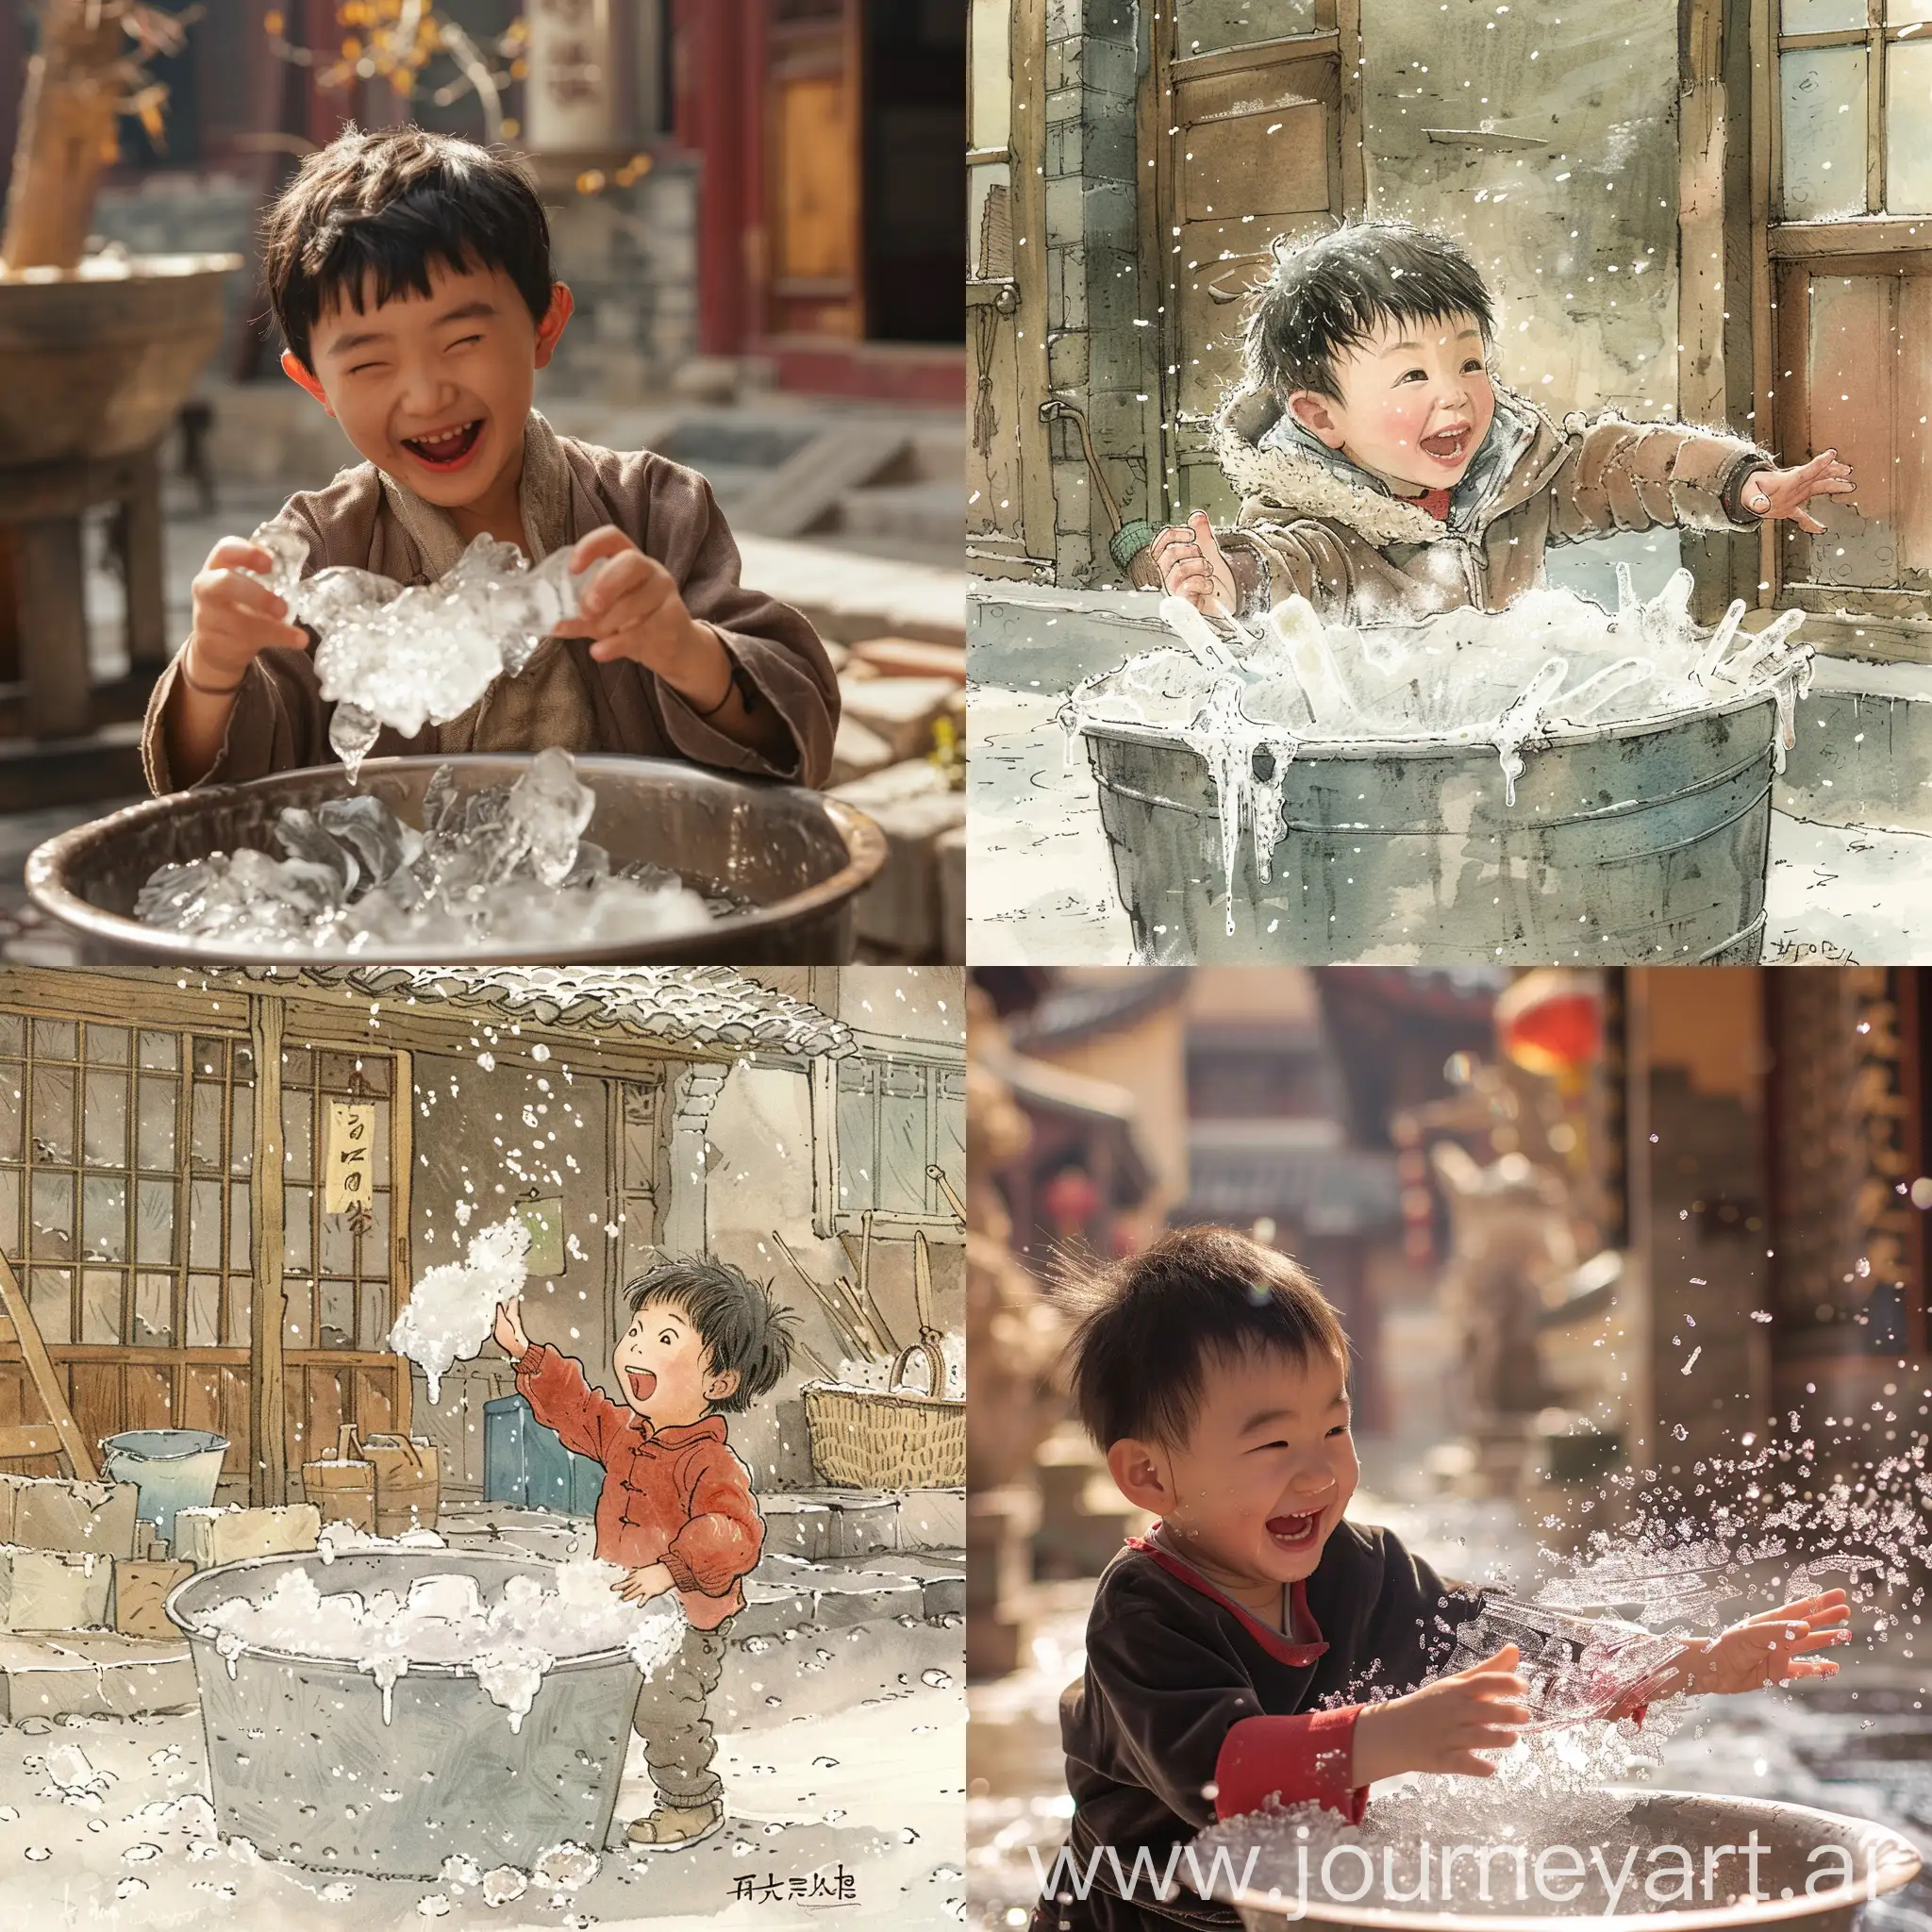 Curious-Child-Observing-Thin-Ice-in-a-Song-Dynasty-Setting